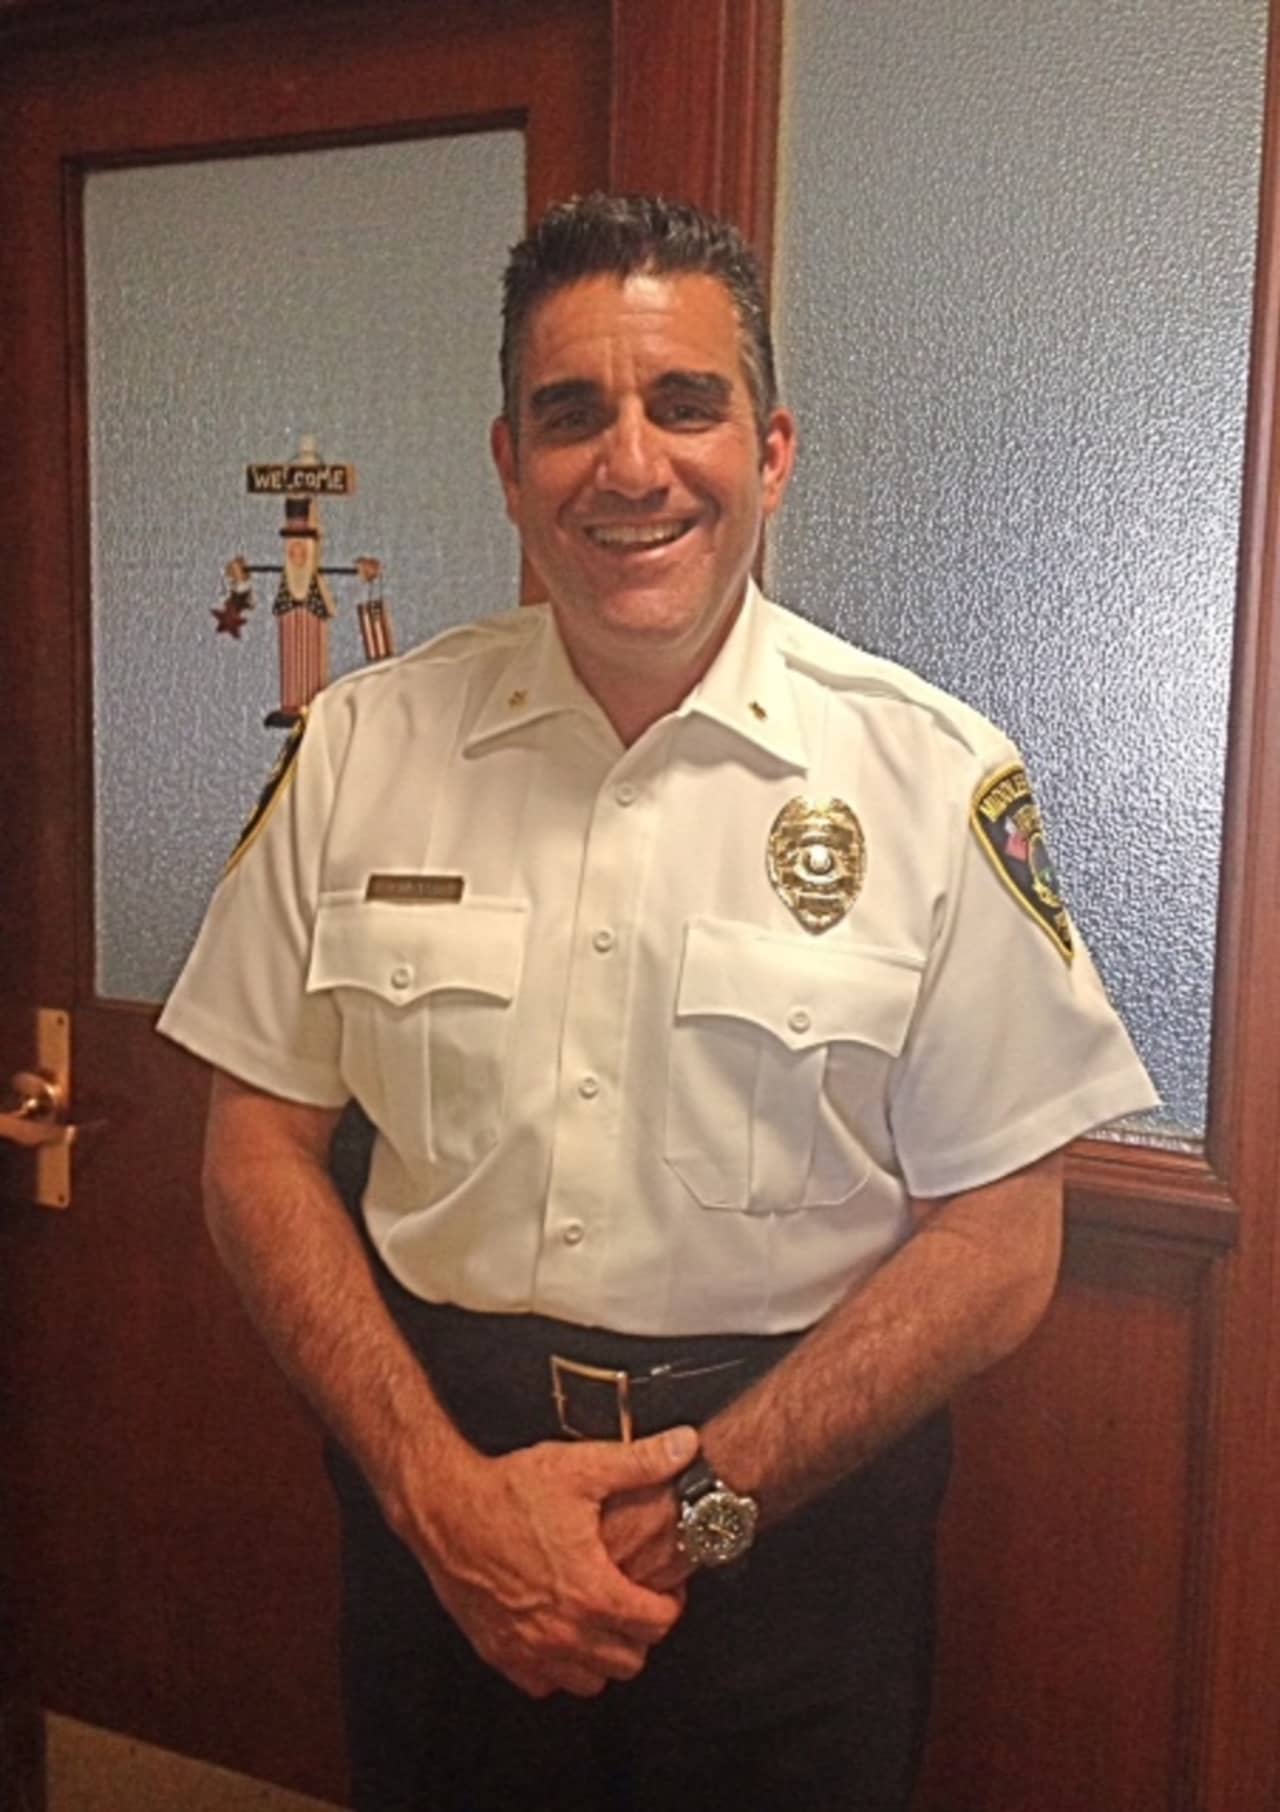 James Viadero, a college professor as well as chief of Middlebury’s small department, was hired as police chief of Newtown's police department, according to a story on newstimes.com.